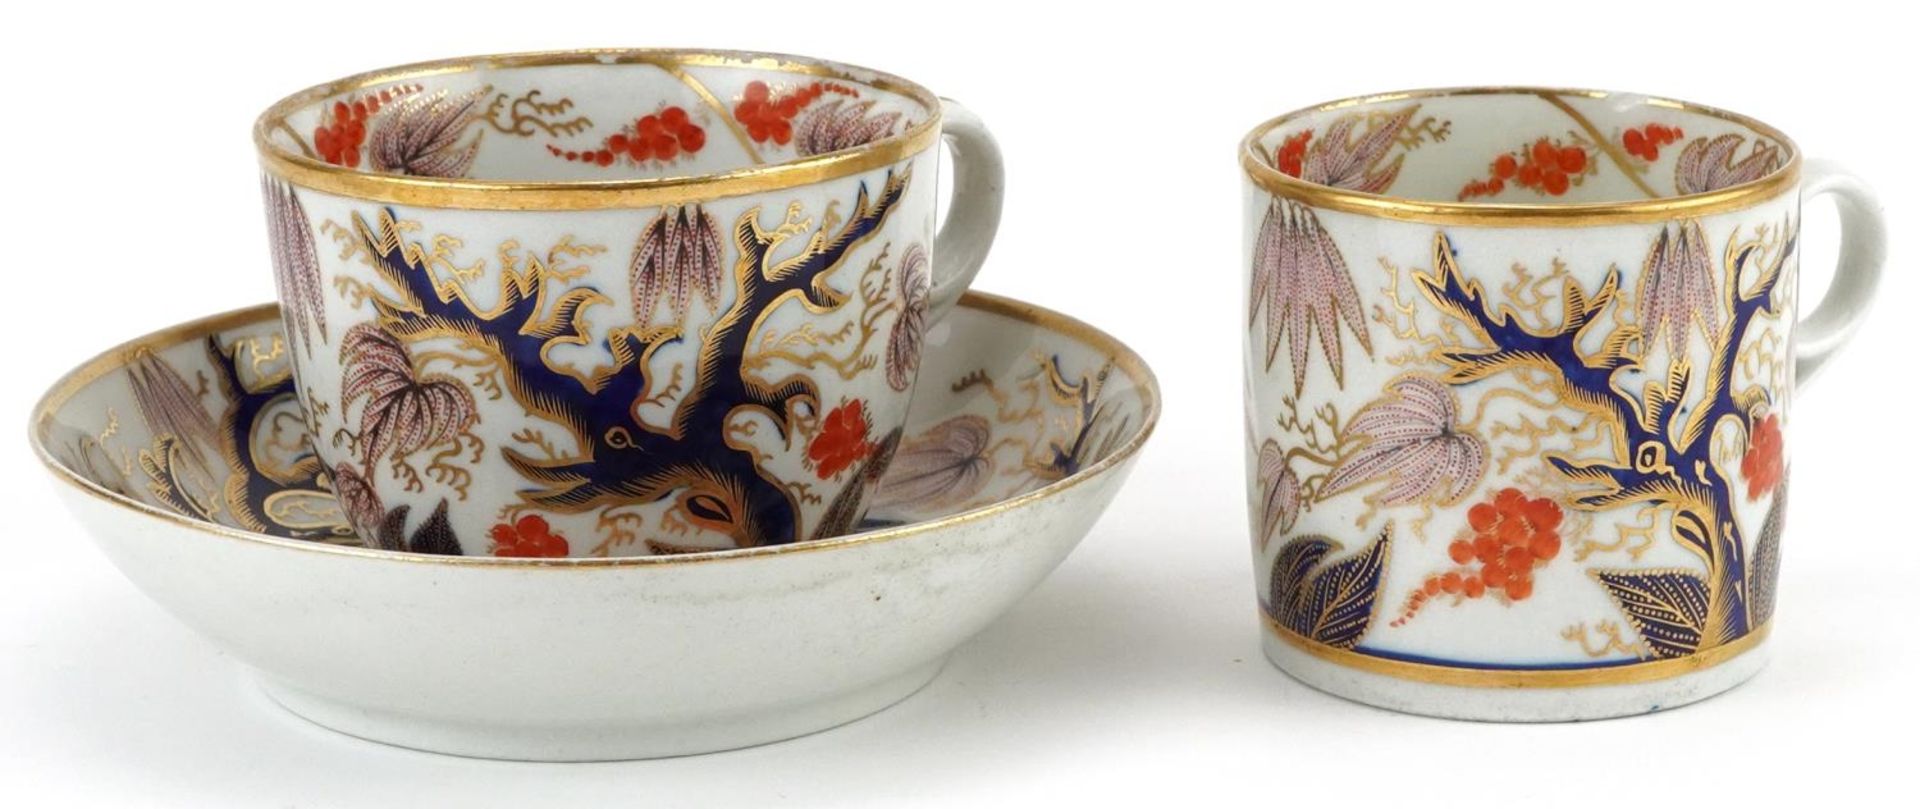 19th century English teaware hand painted in the Imari palette with flowers comprising coffee can